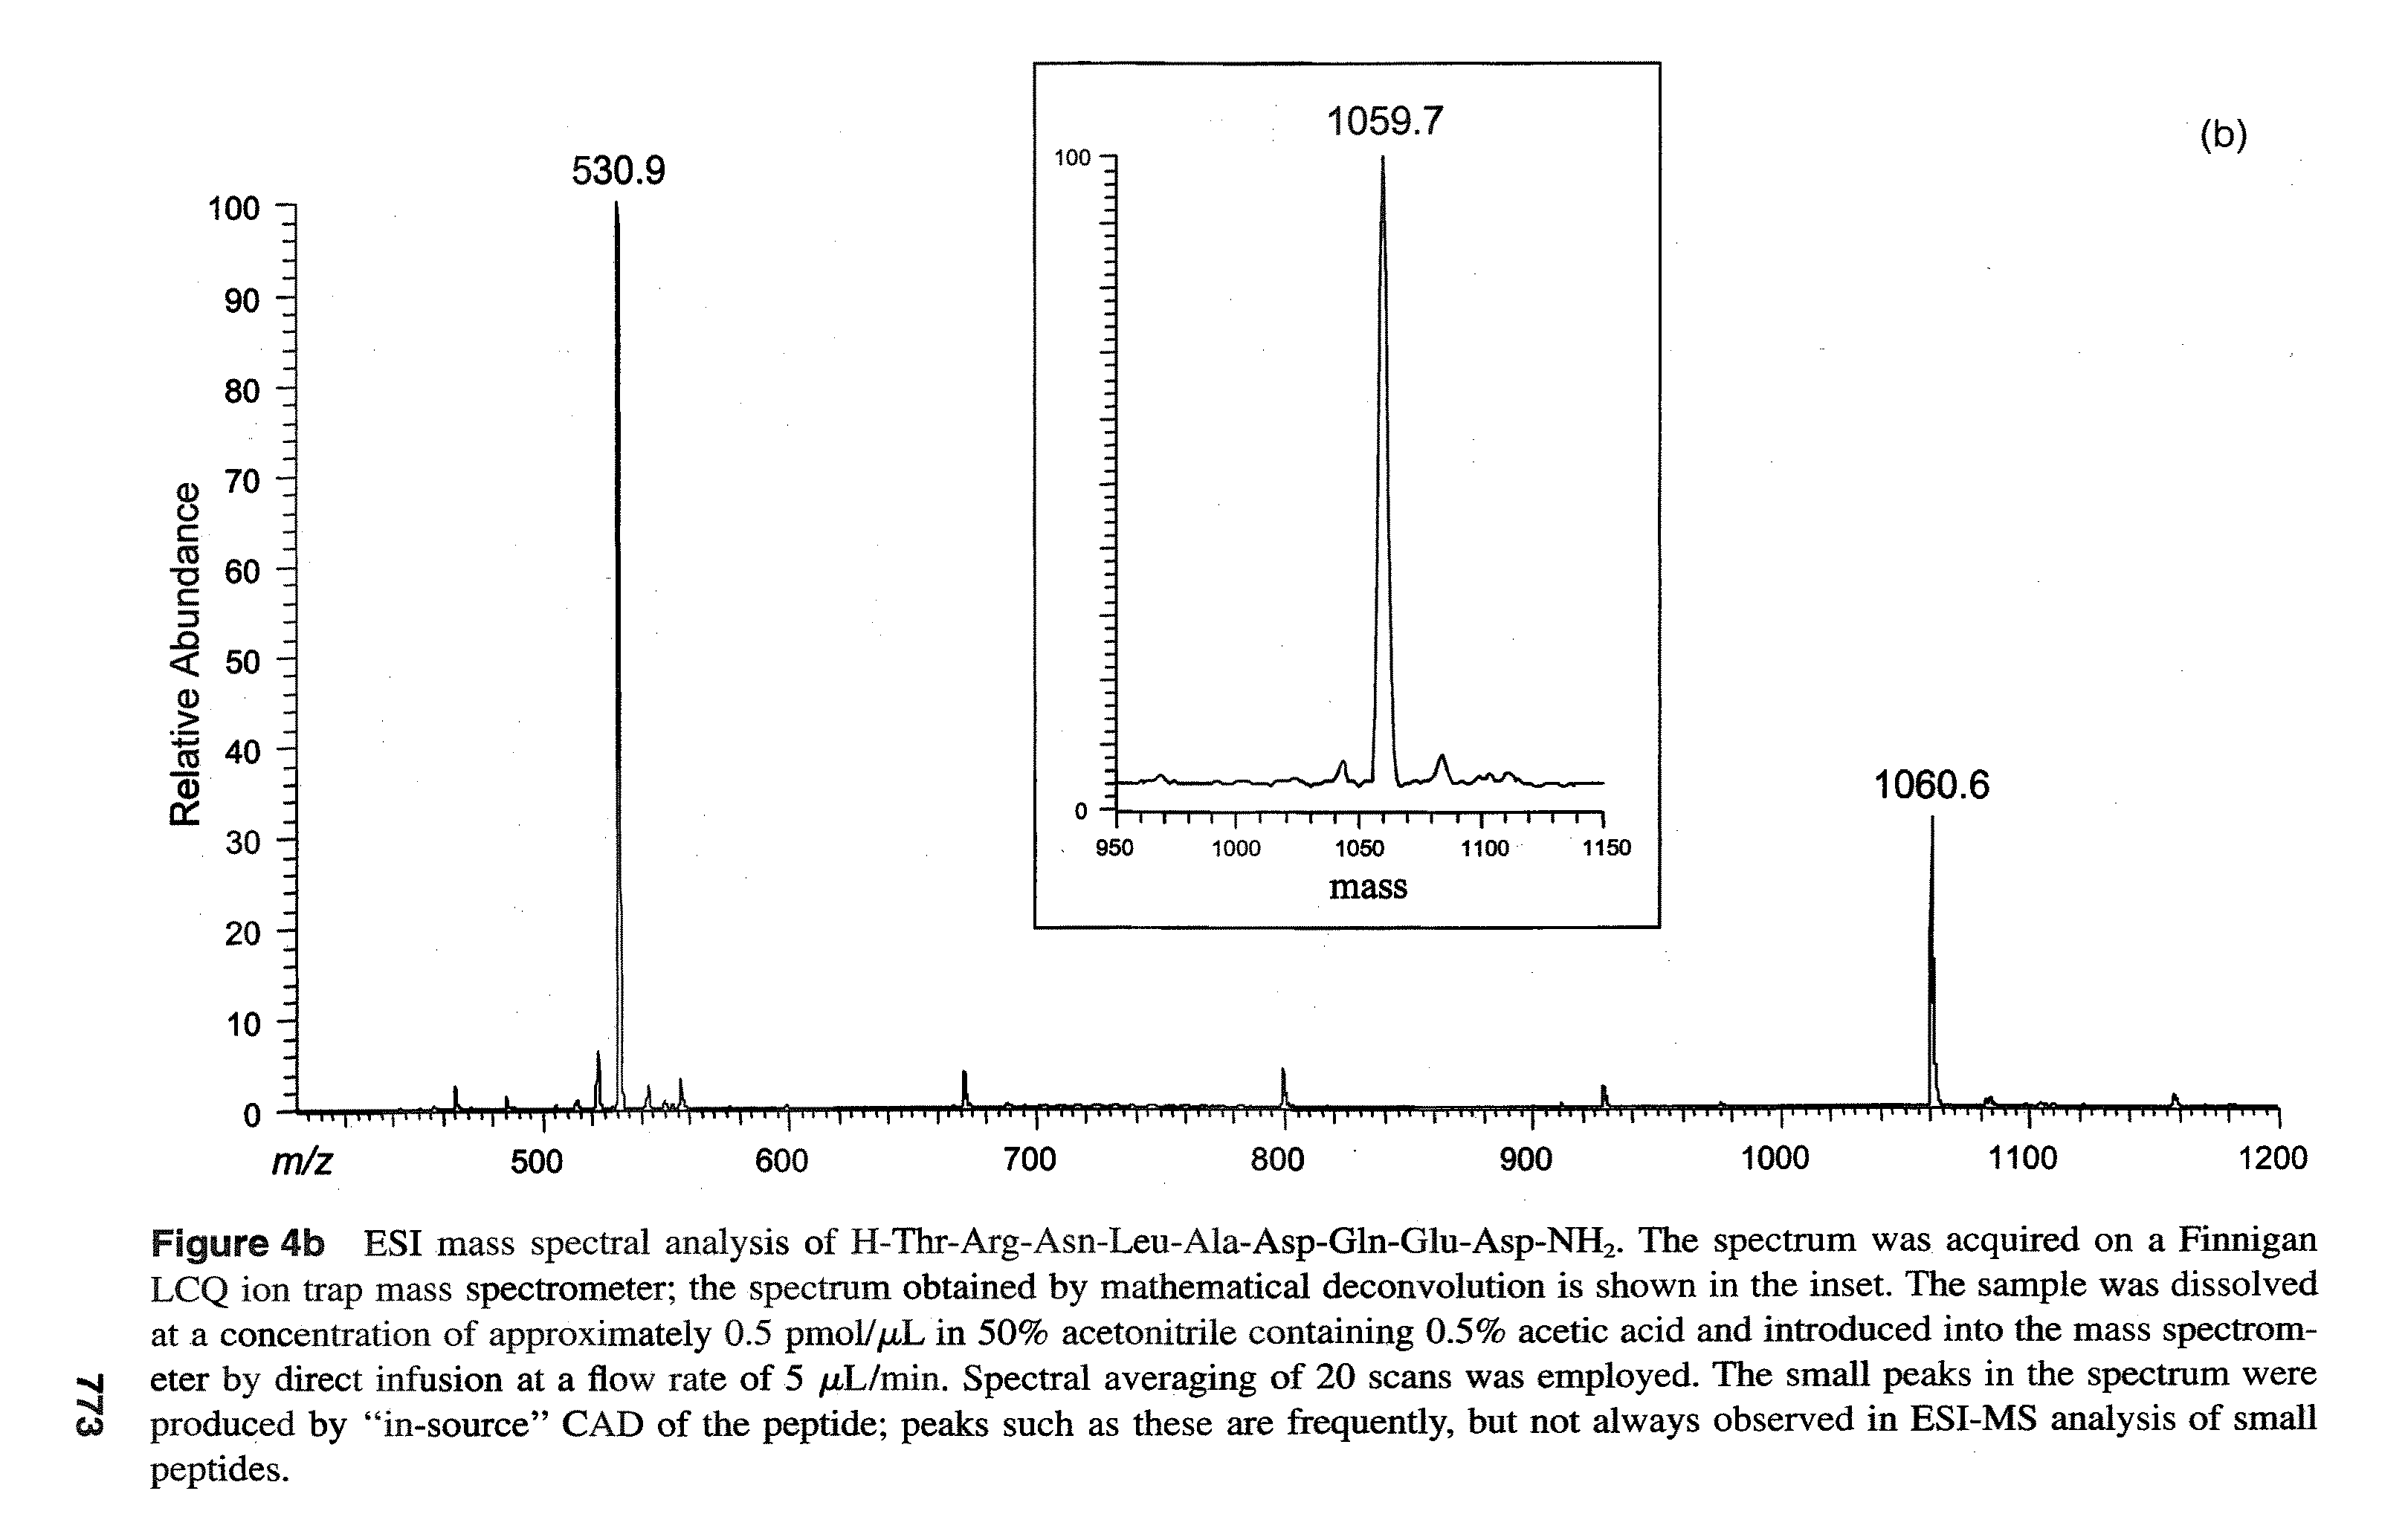 Figure 4b ESI mass spectral analysis of H-Thr-Arg-Asn-Leu-Ala-Asp-Gln-Glu-Asp-NH2. The spectrum was acquired on a Finnigan LCQ ion trap mass spectrometer the spectrum obtained by mathematical deconvolution is shown in the inset. The sample was dissolved at a concentration of approximately 0.5 pmol//xL in 50% acetonitrile containing 0.5% acetic acid and introduced into the mass spectrometer by direct infusion at a flow rate of 5 iL/min. Spectral averaging of 20 scans was employed. The small peaks in the spectrum were produced by in-source CAD of the peptide peaks such as these are frequently, but not always observed in ESI-MS analysis of small peptides.